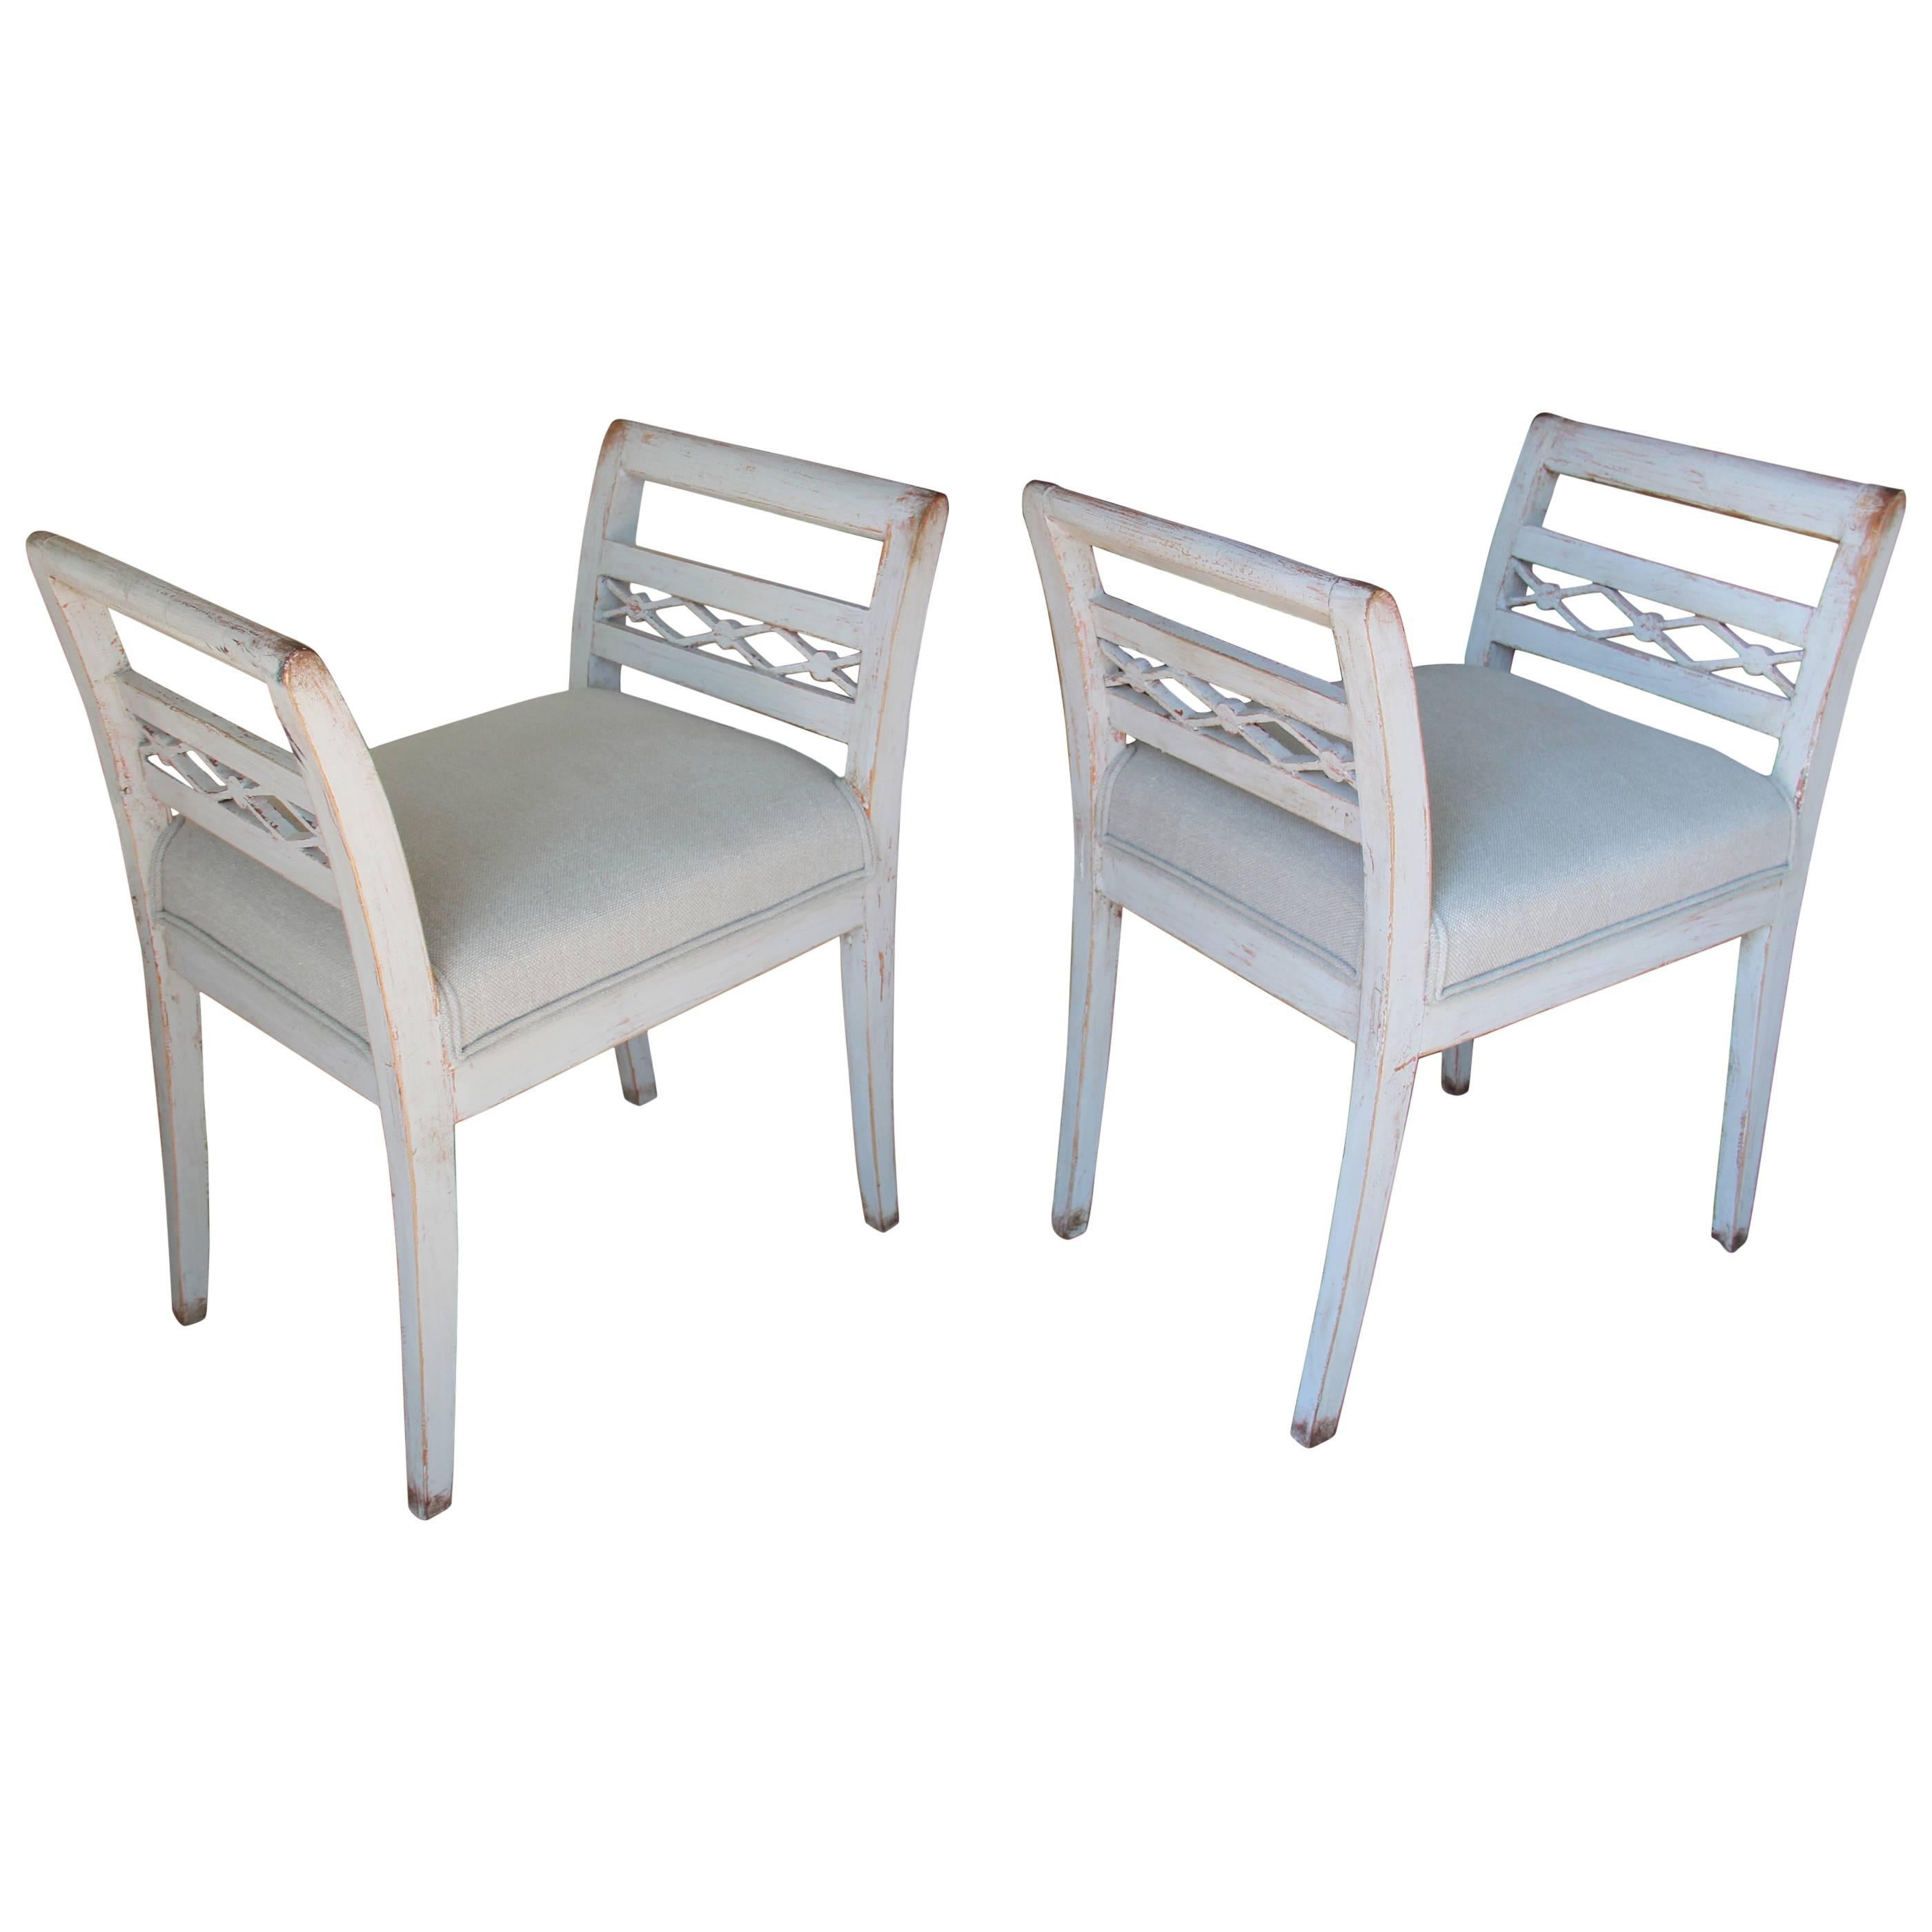 Pair of Swedish stools from the 19th century with slight saber legs, displaying clean neoclassic details on the arms and newly upholstered in de Le Cuona Urban Linen, color stone.

The Gustavian style, named after King Gustav III of Sweden, is a